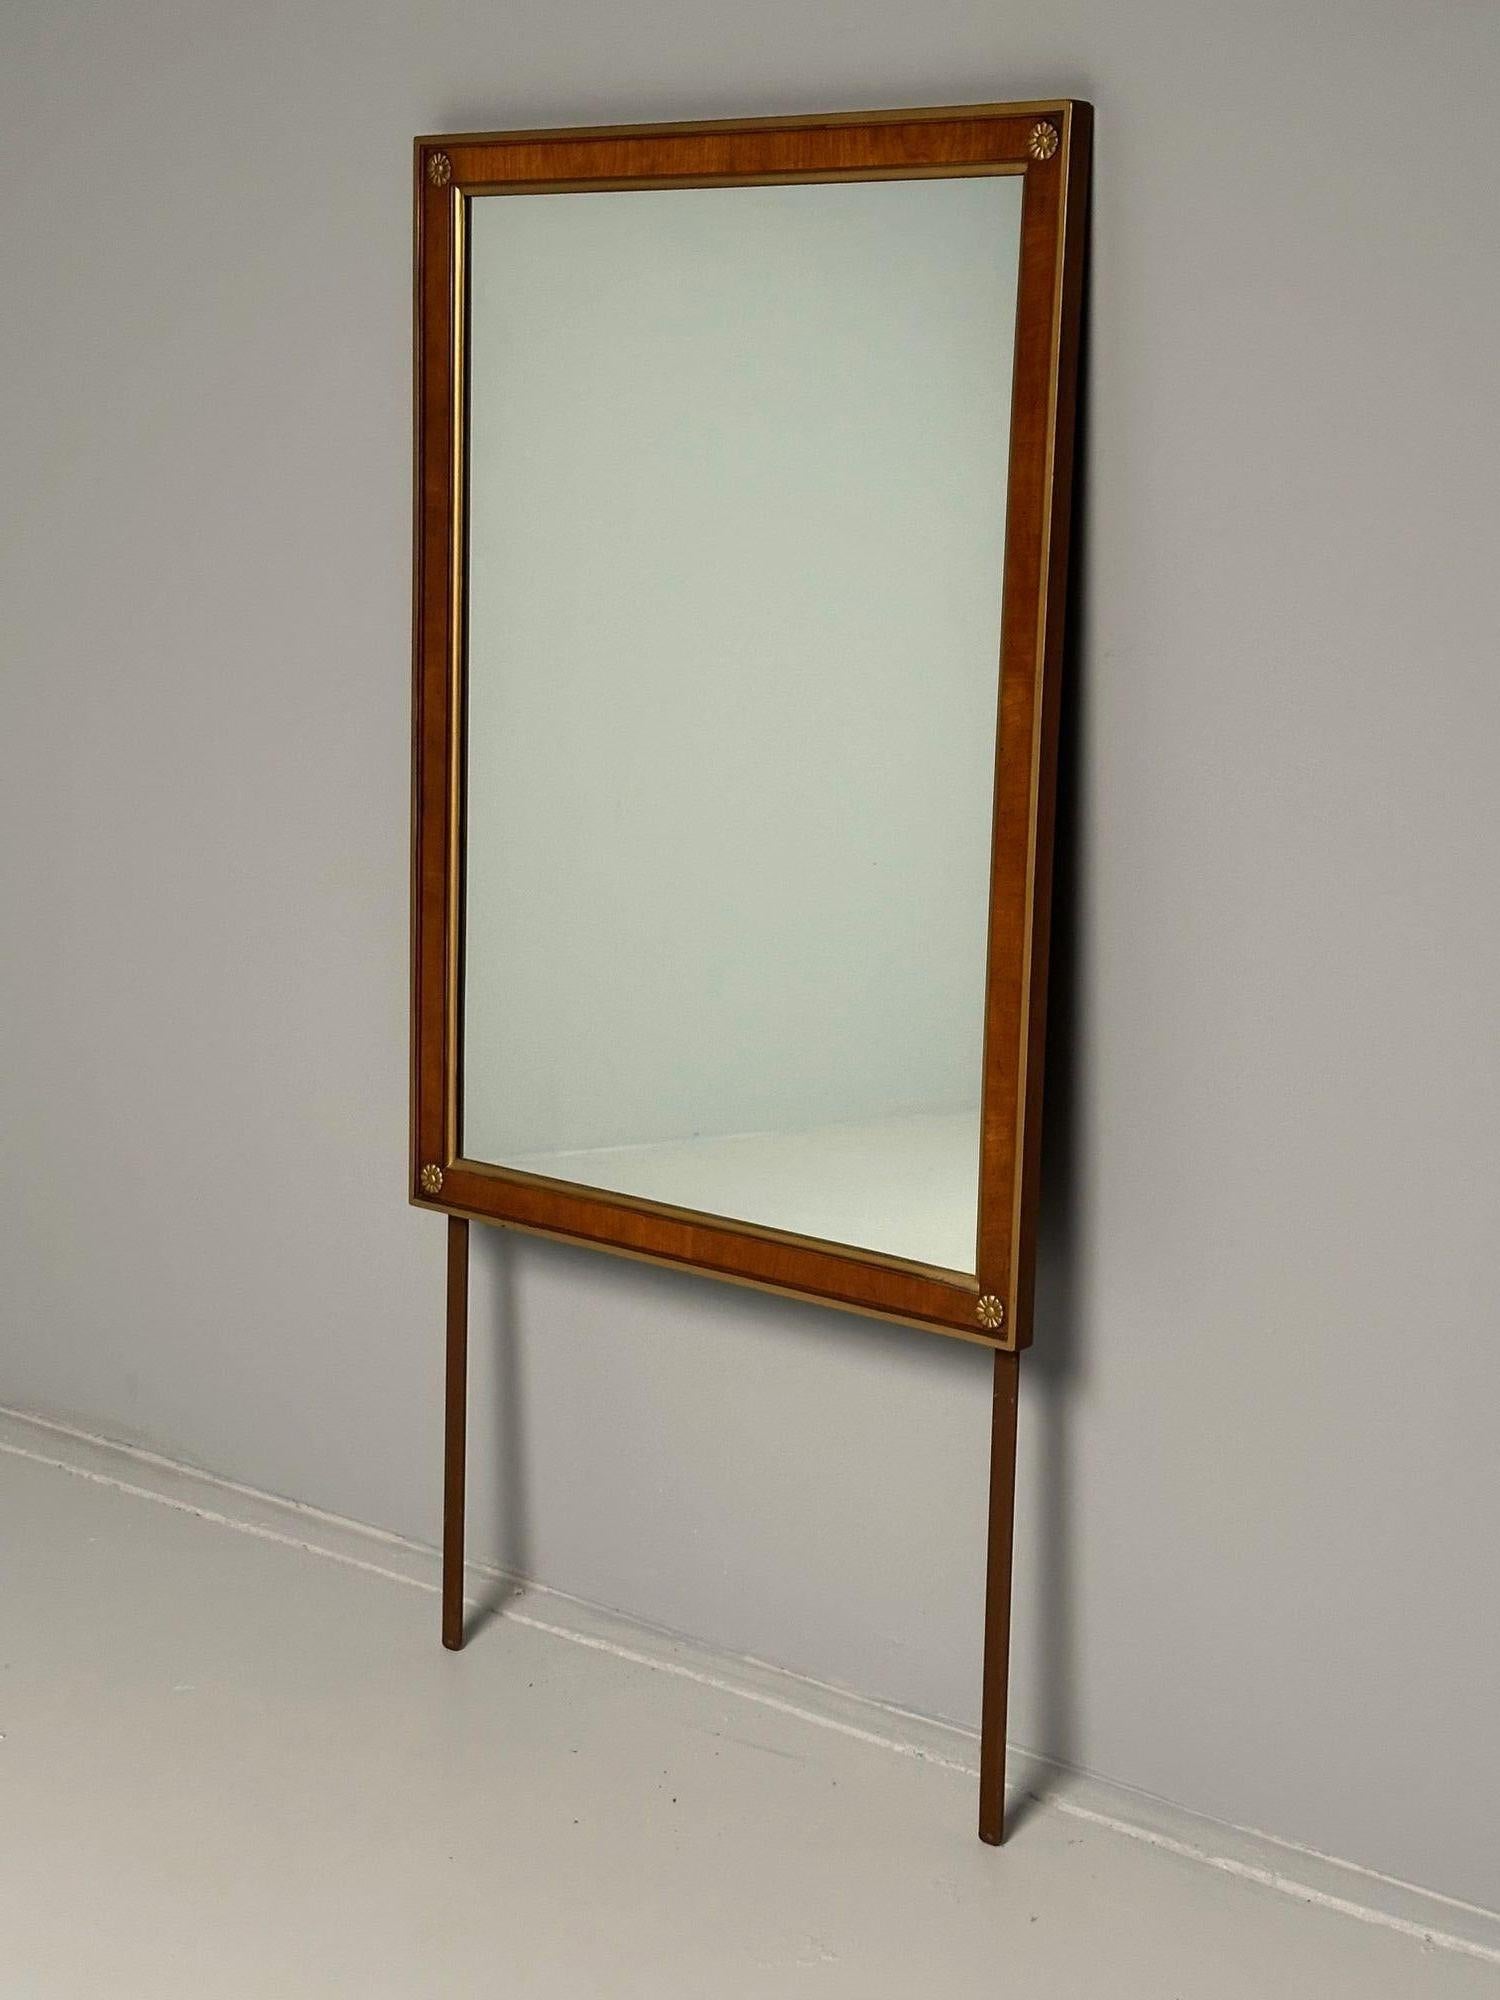 Walnut Bronze Mounted Hollywood Regency Wall or Dresser, Console Mirror

Most likely by Milo Baughman this rectangular wall mirror can hang vertically or horizontally. The center walnut frame surrounding a clean clear mirror with double bronze